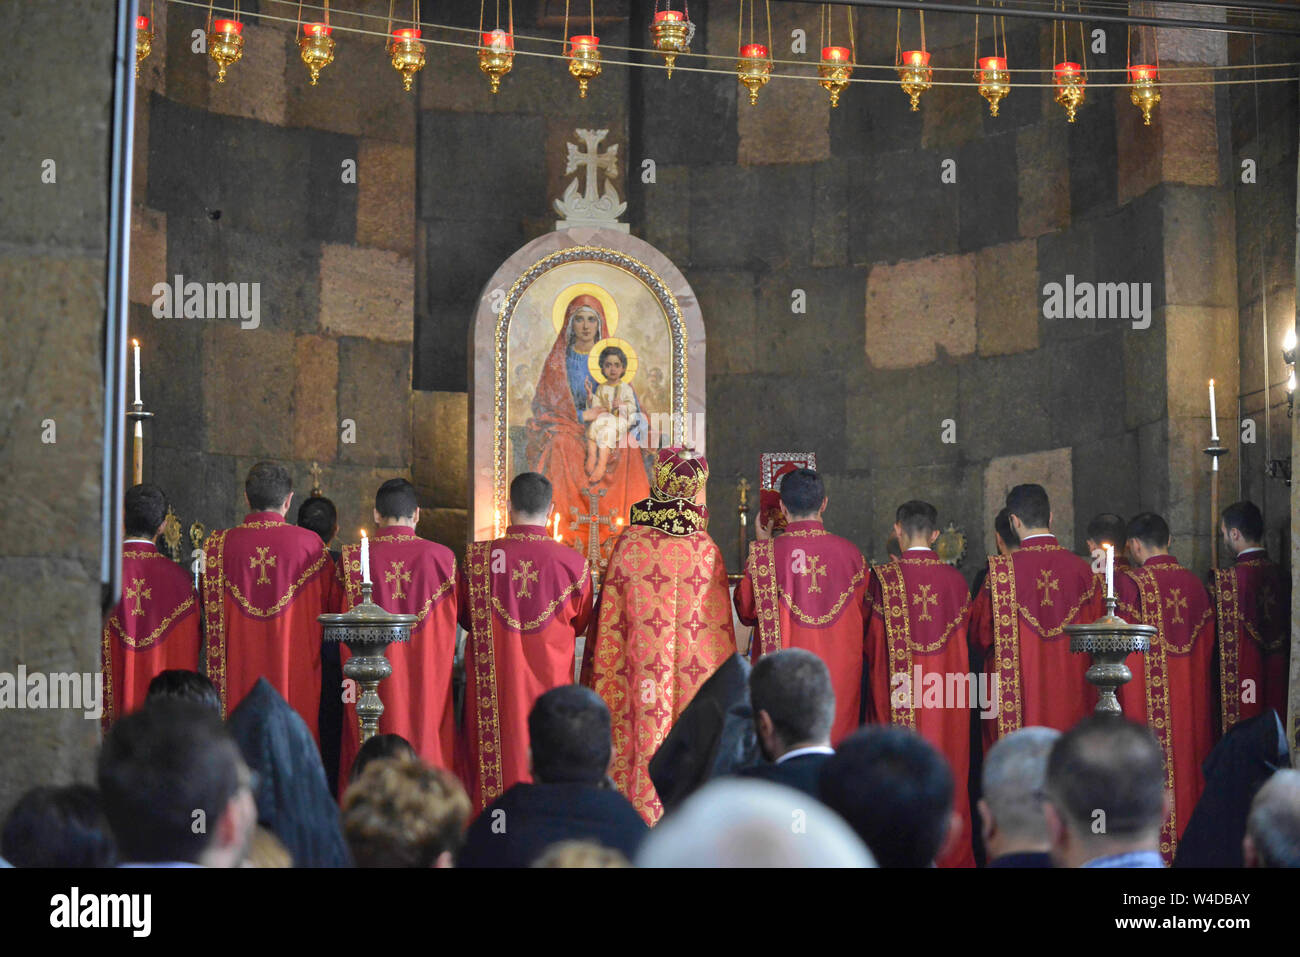 July 21, 2019 - Yerevan, Republic of Armenia - Vagharshapat is a town in  Armenia and the site of Etchmiadzin the Holy See of the Armenian Apostolic  Church including the Etchmaidzin Cathedral,301